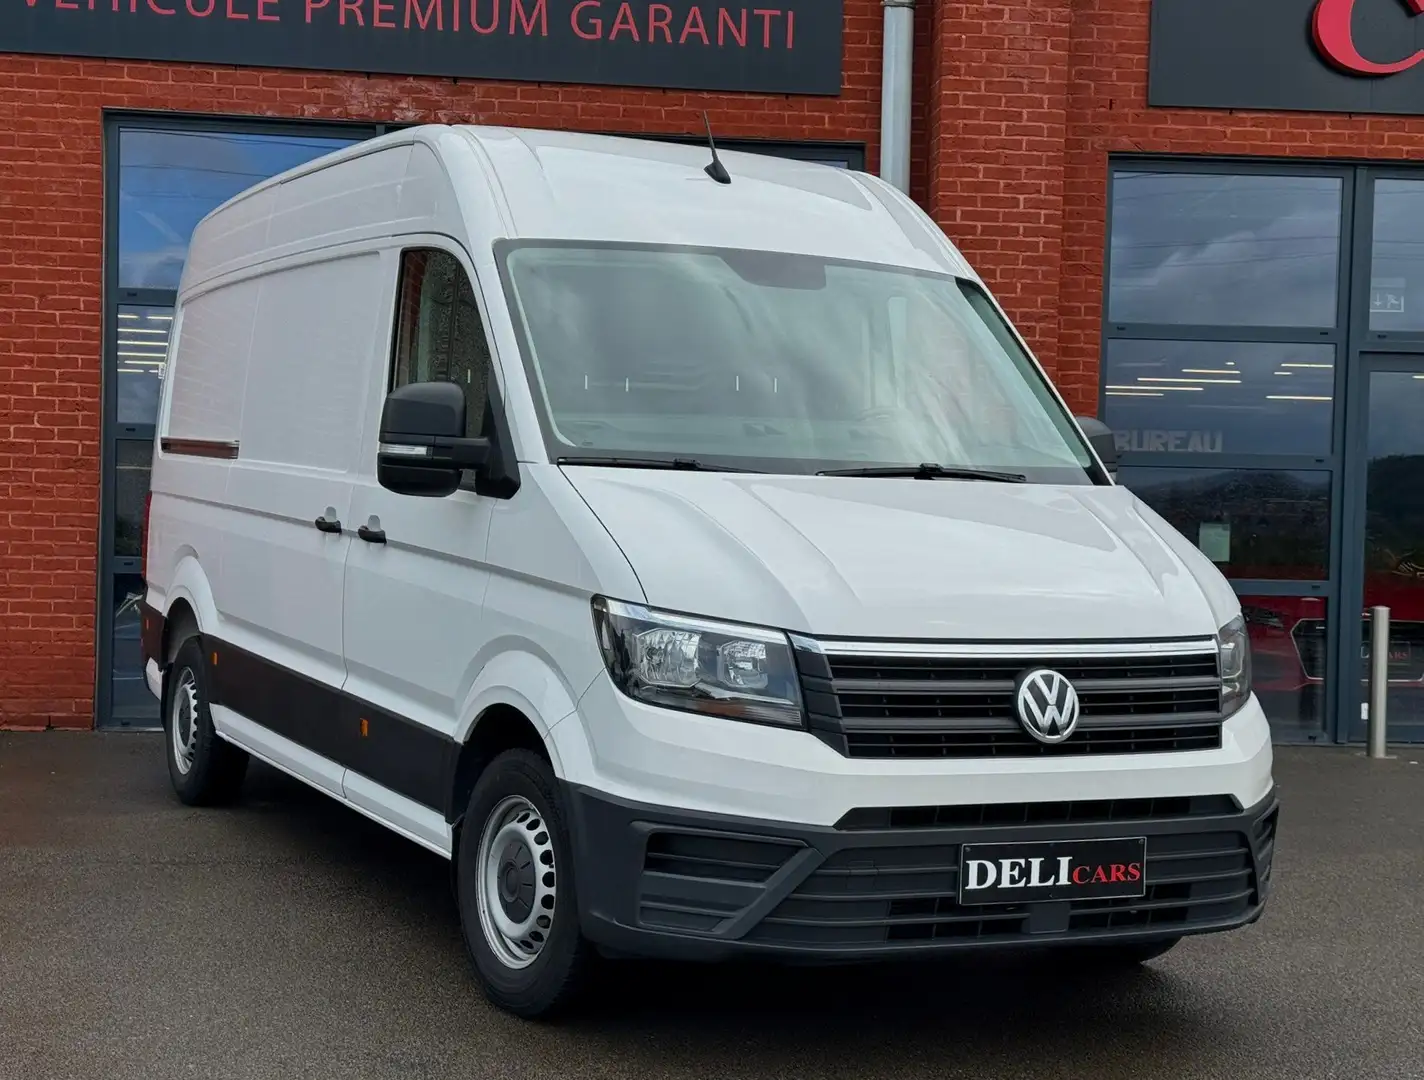 Volkswagen Crafter 2.0 TDI L3H3 Dsg Tvac 3Places Camera Apple/Androi Blanc - 1